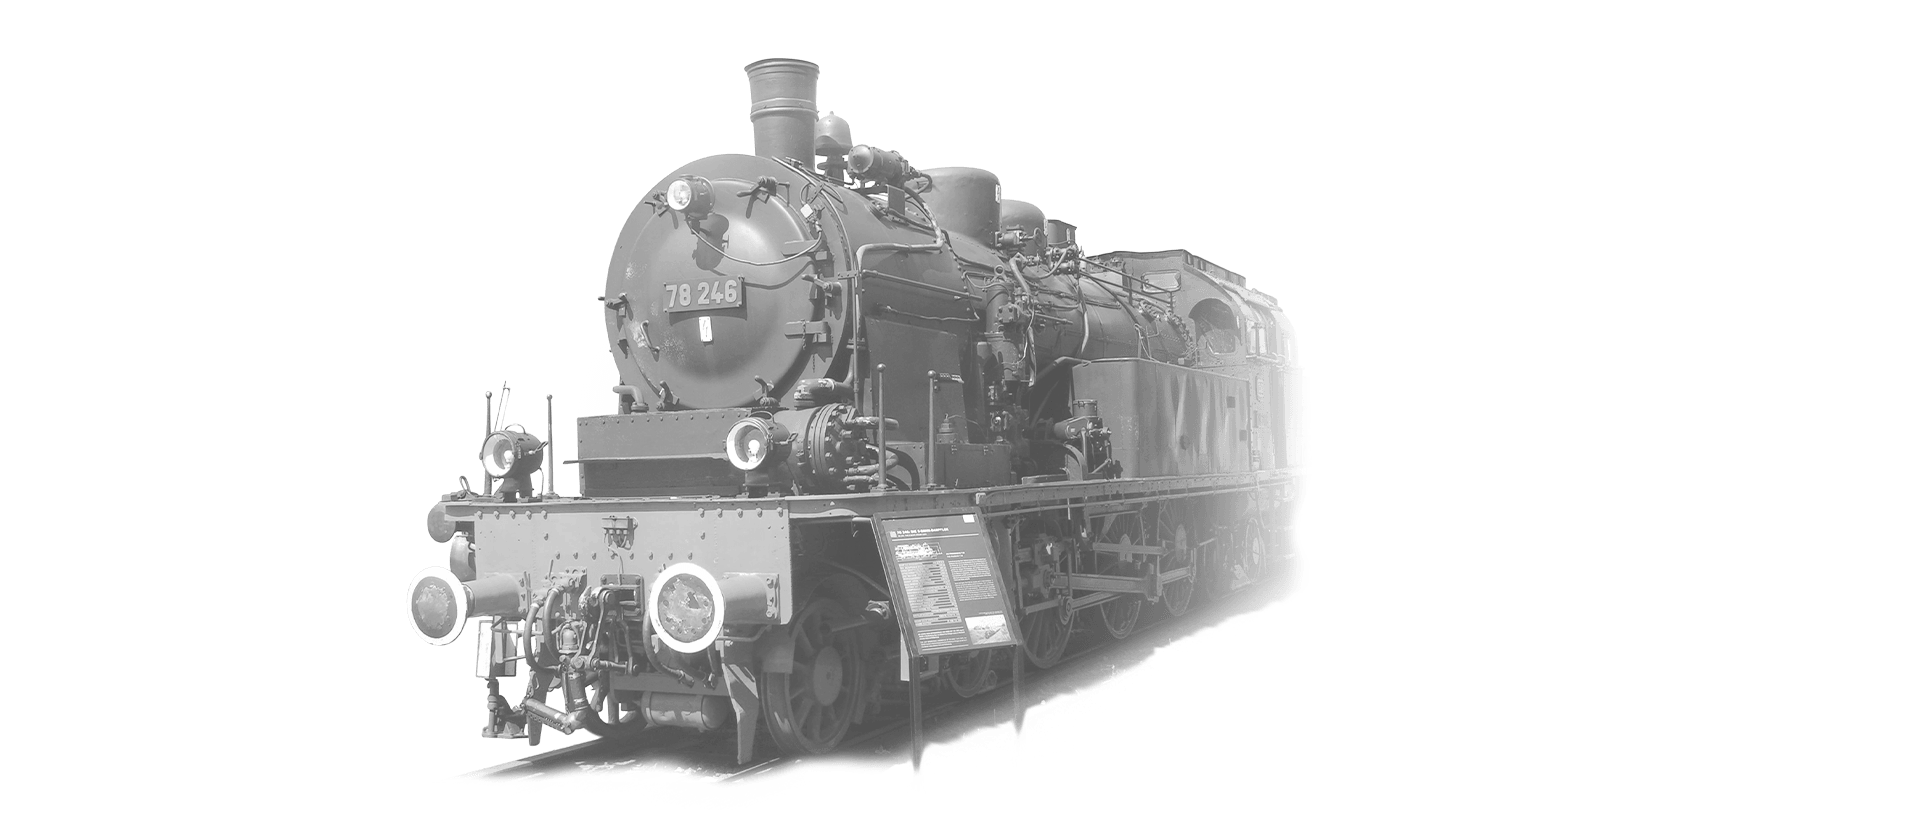 The locomotive 78-246 is coming towards the camera in black and white